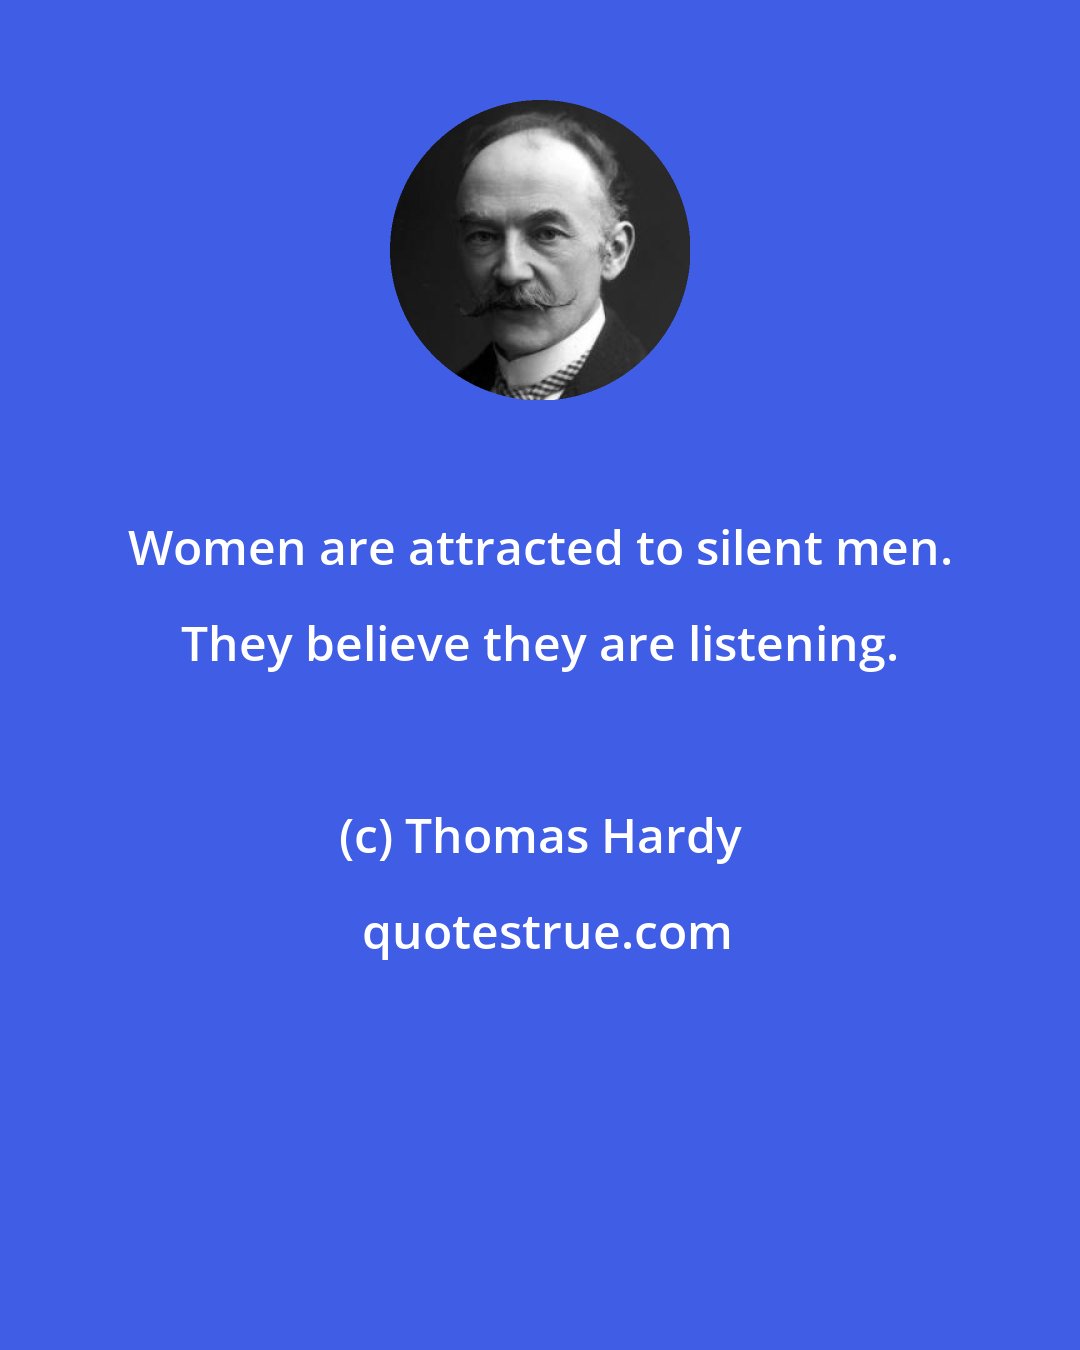 Thomas Hardy: Women are attracted to silent men. They believe they are listening.